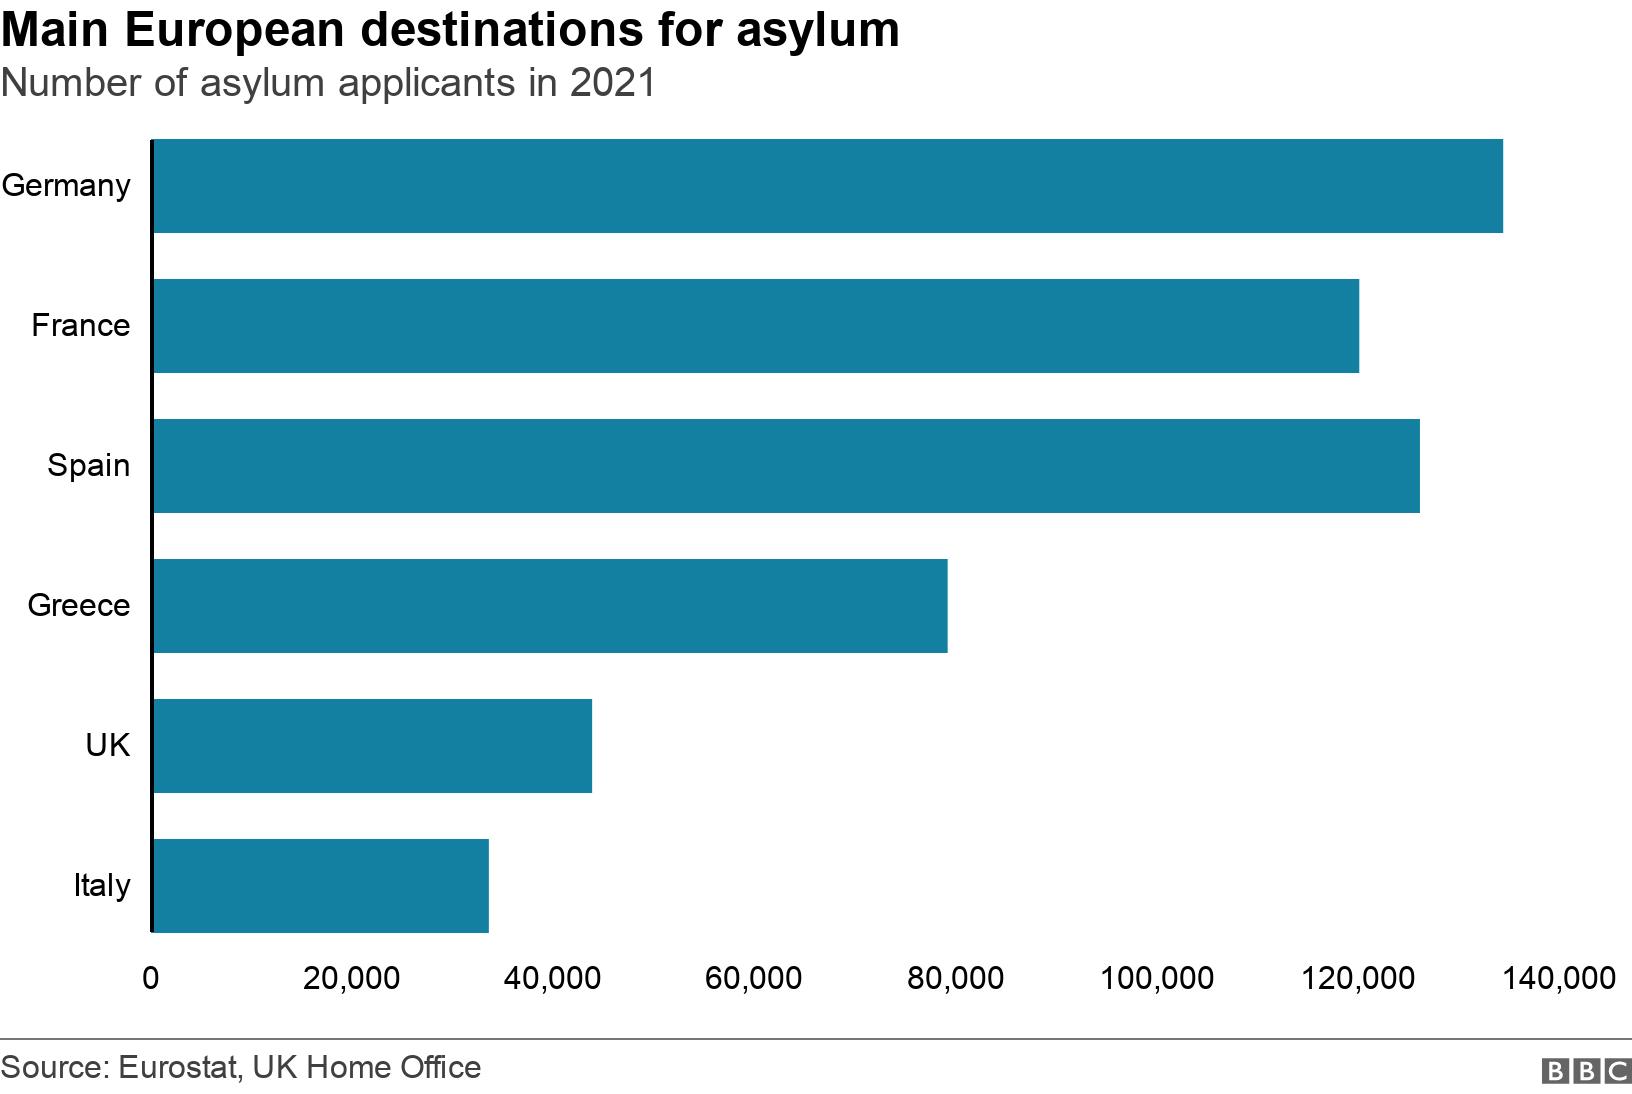 Main European destinations for asylum. Number of asylum applicants in 2020. Germany had the most asylum applicants in Europe in 2020 - more than 100,000. The UK was fifth after France, Spain and Greece with around 40,000. .